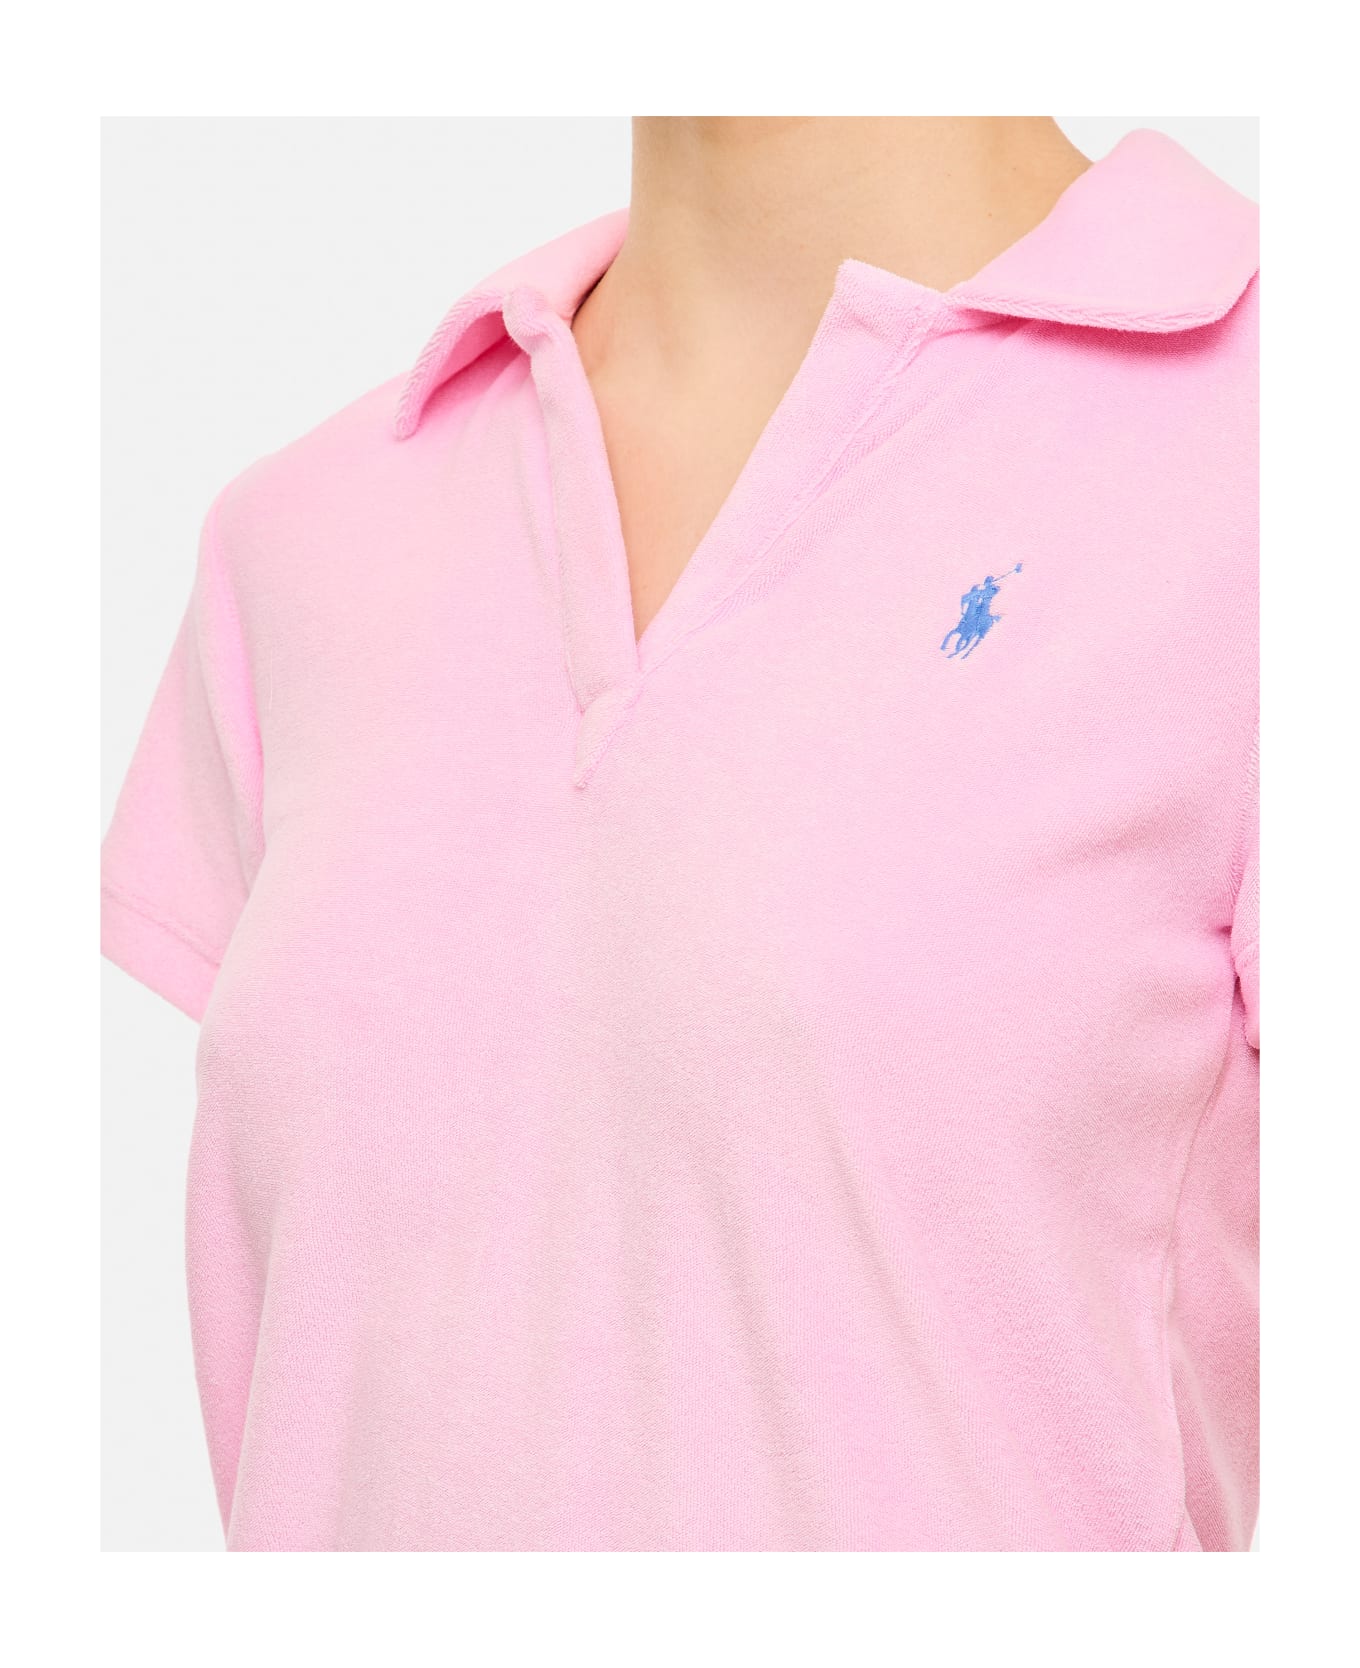 Polo Ralph Lauren Terry Short Sleeves Polo Shirt - Pink ポロシャツ